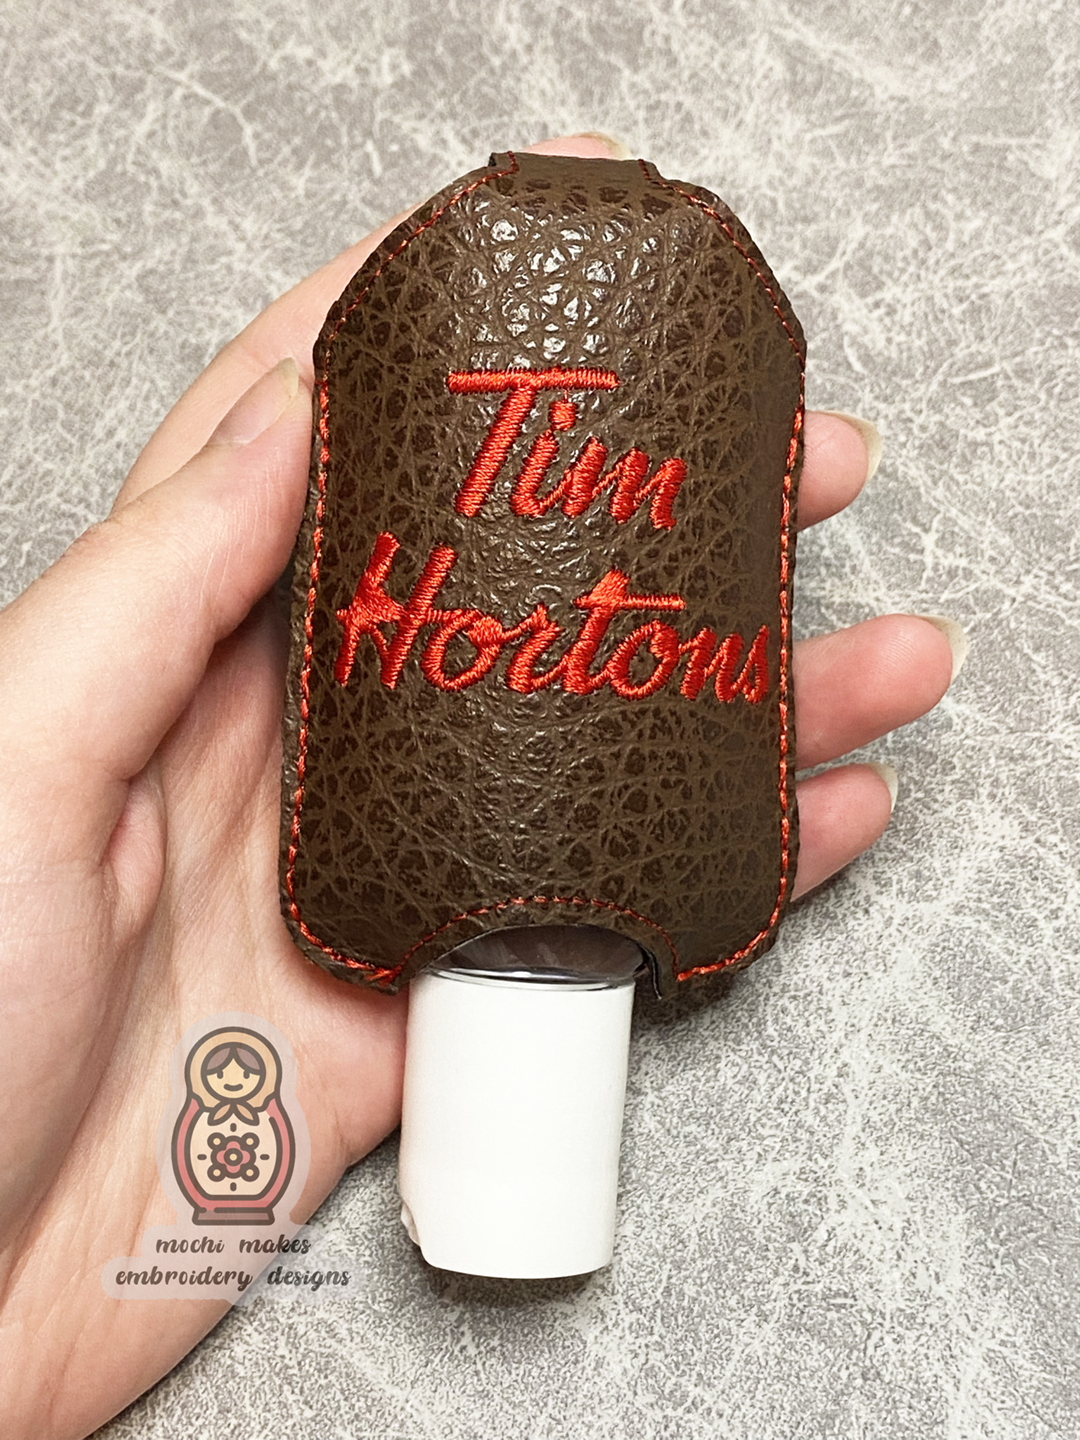 Tim Hortons ITH Hand Sanitizer Keychain 5x7 Canada Canadian Canuck Coffee Timbit Machine Embroidery Design Digital Download File